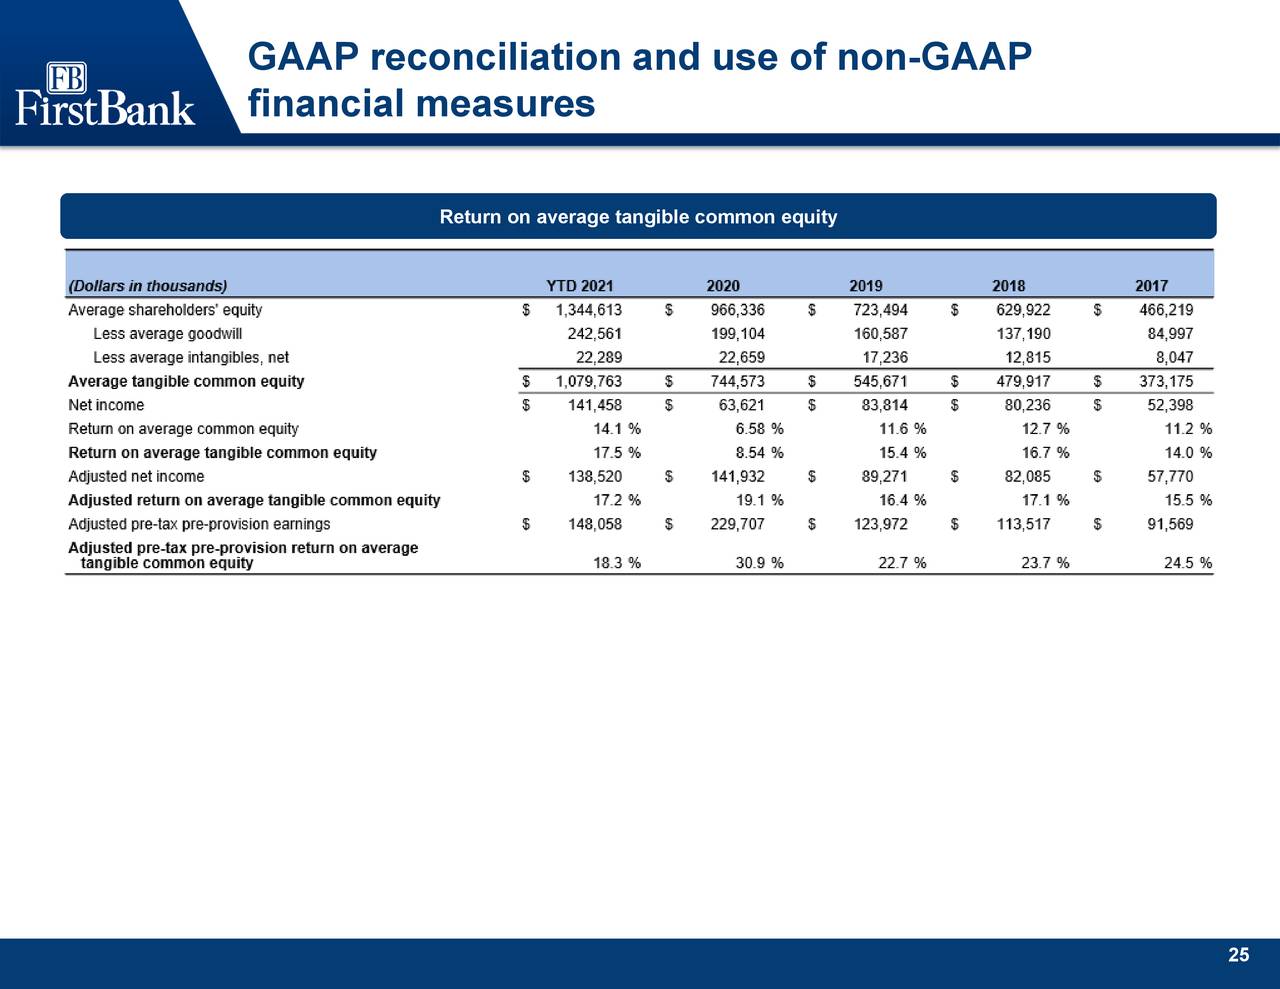 GAAP reconciliation and use of non-GAAP